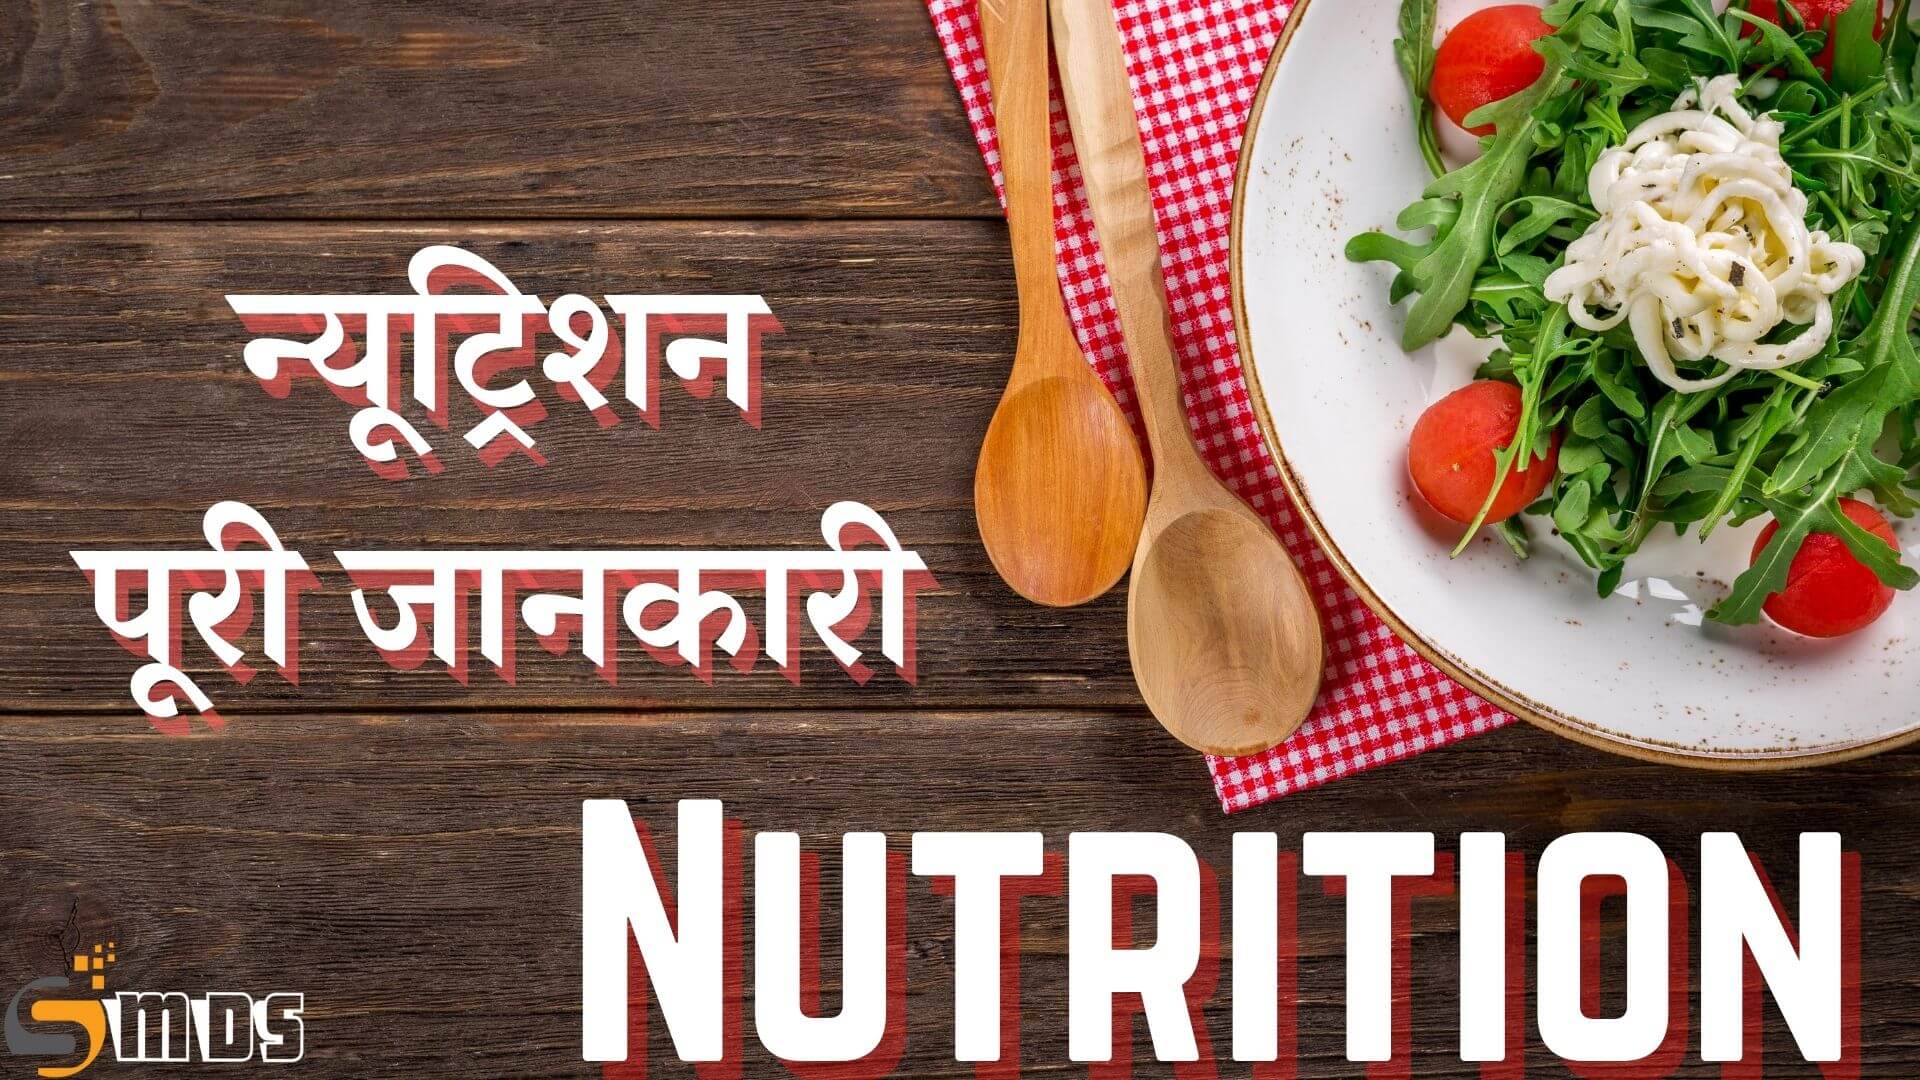 न्यूट्रिशन क्या है - What is Nutrition in Hindi, Nutritious meaning in Hindi, Importance of nutrition